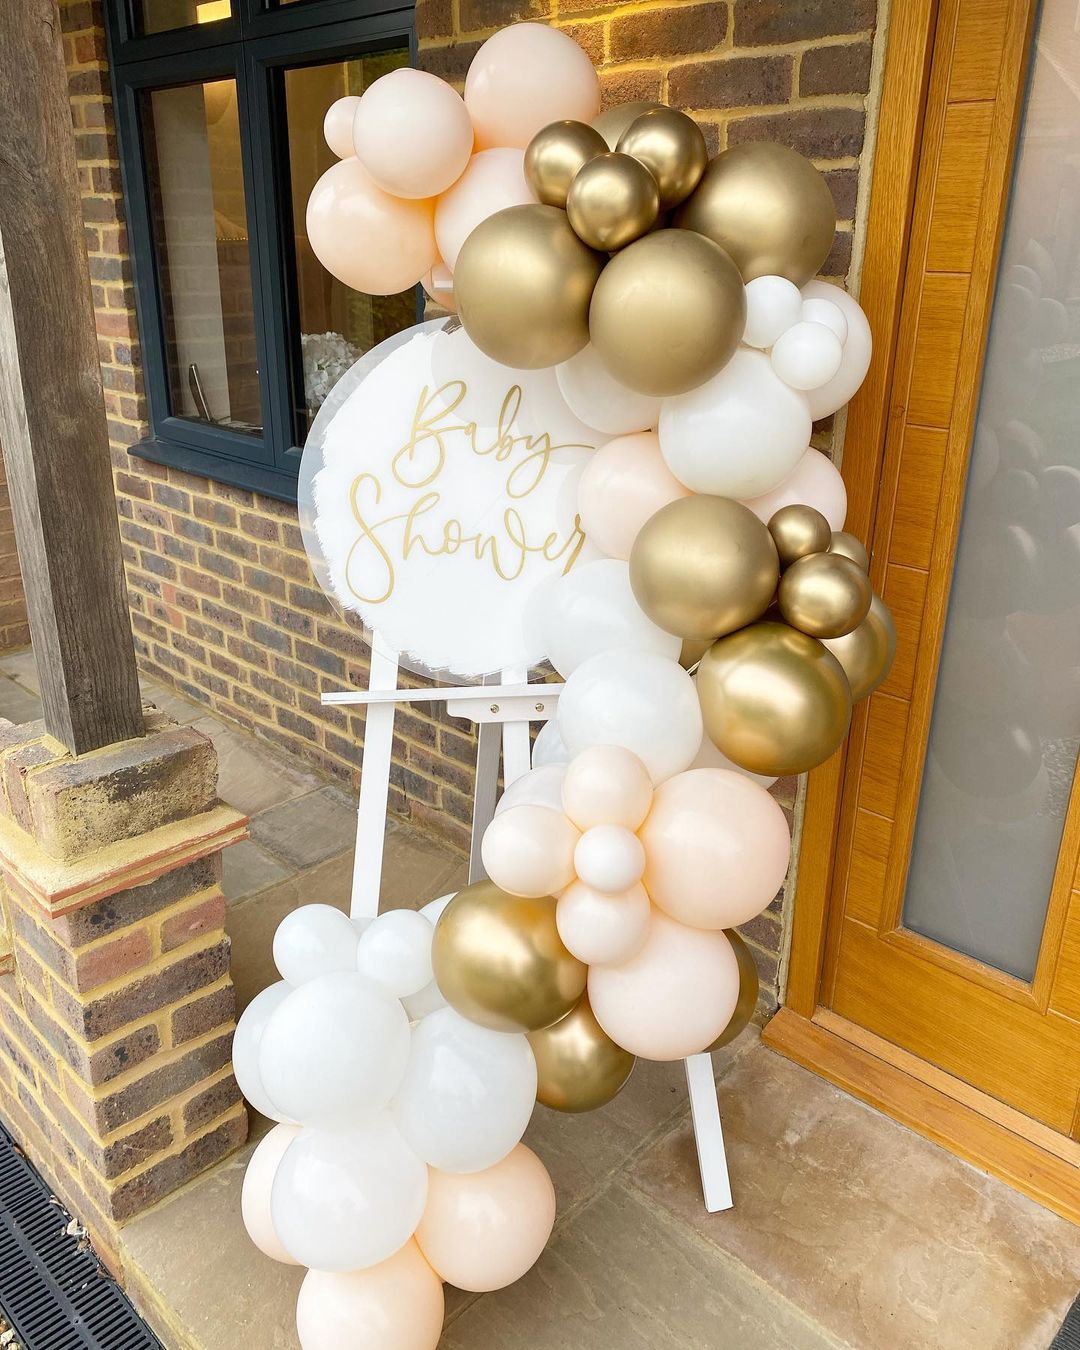 Baby shower balloons are pictures. Photo by Instagram user @thelittlepropcompany.